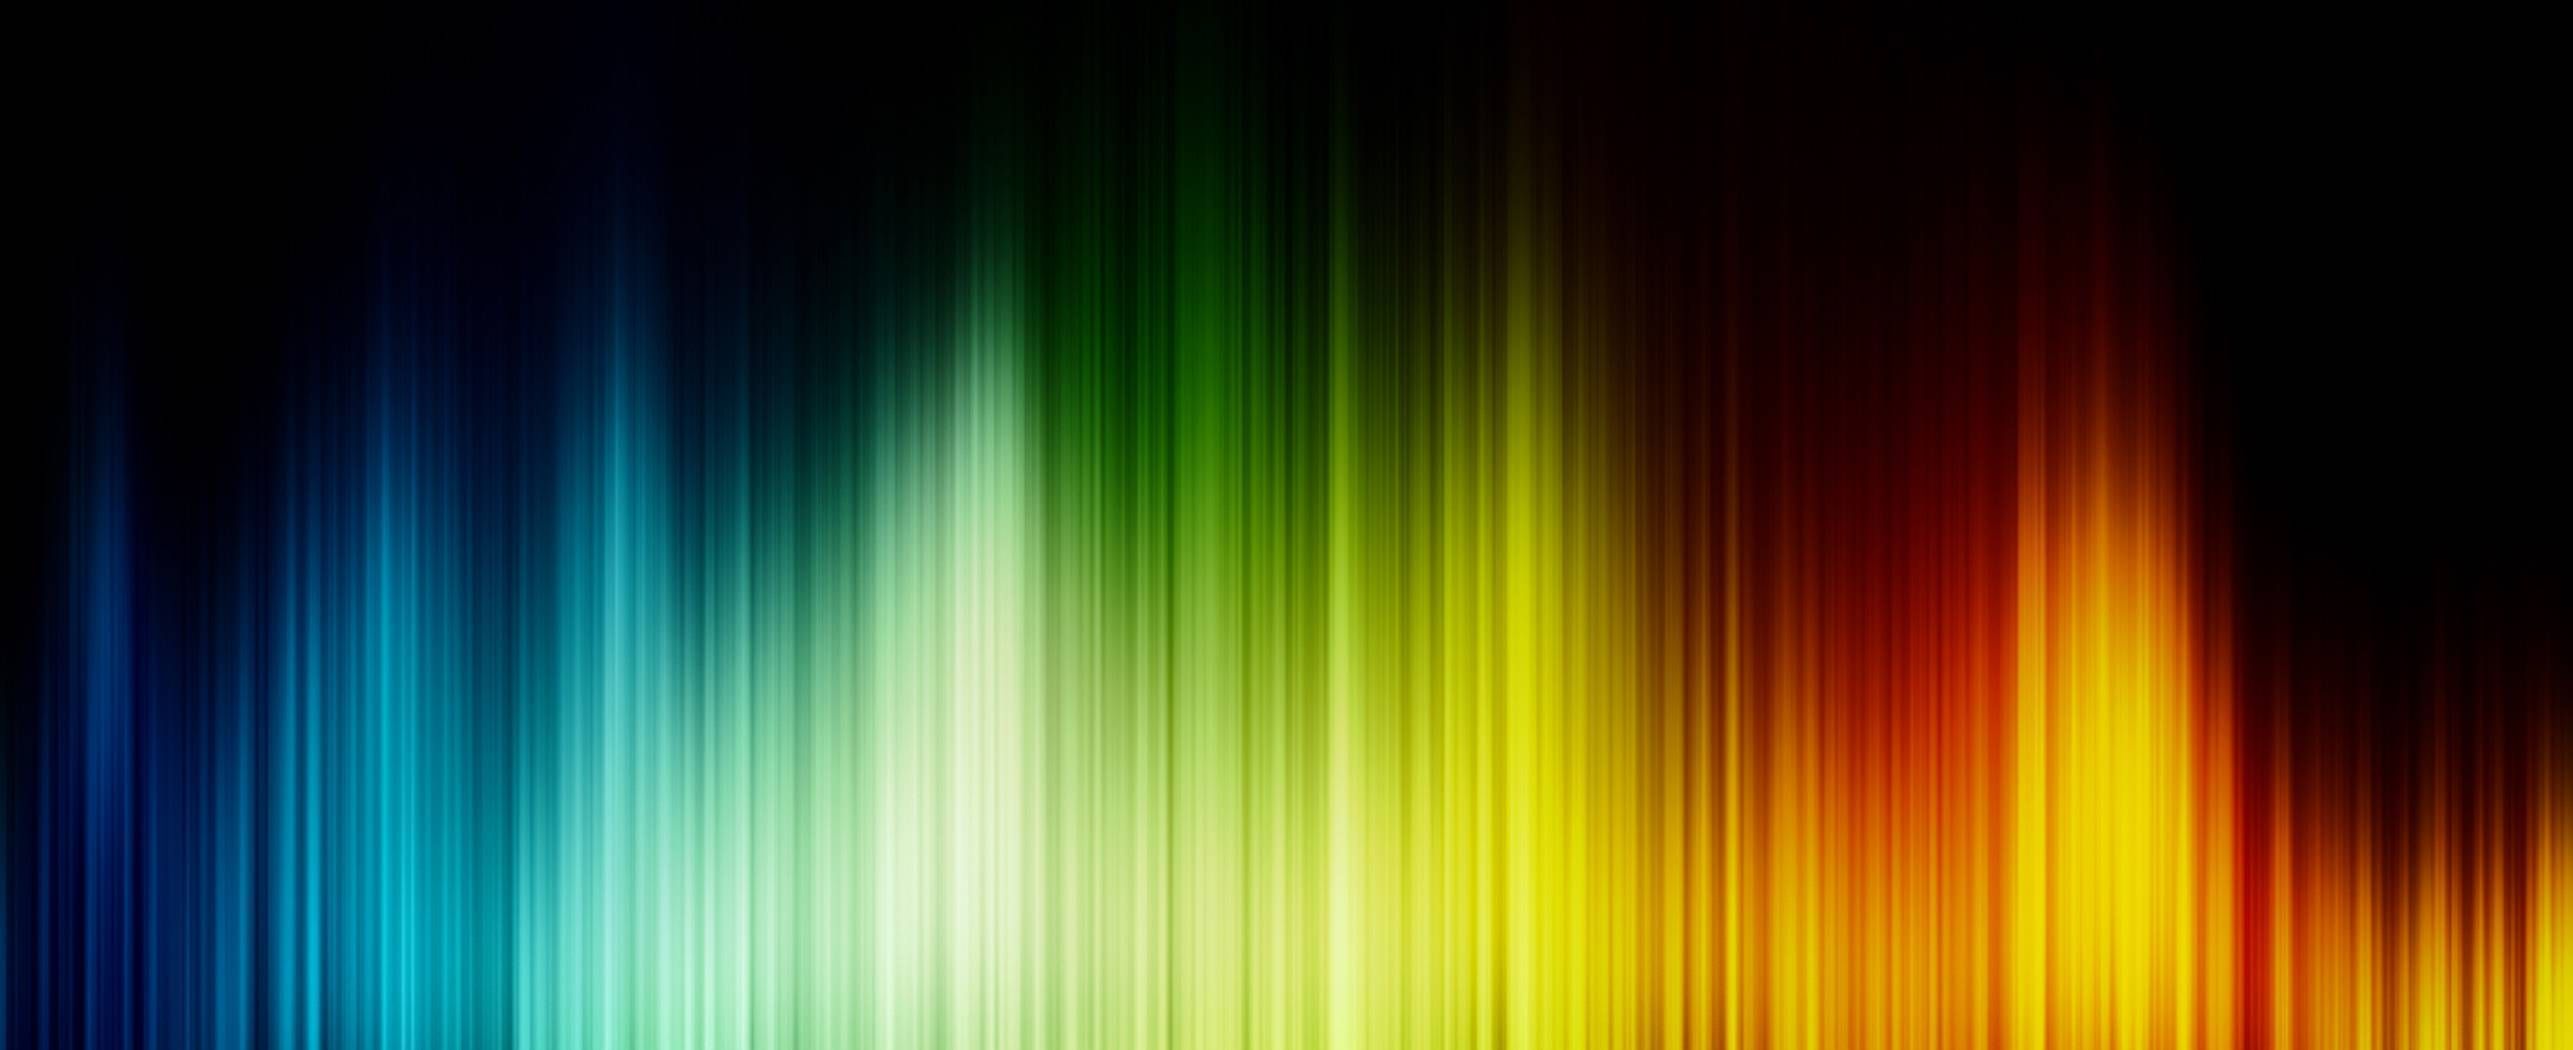 Rainbow dual screen wallpaper - (#17977) - High Quality and ...